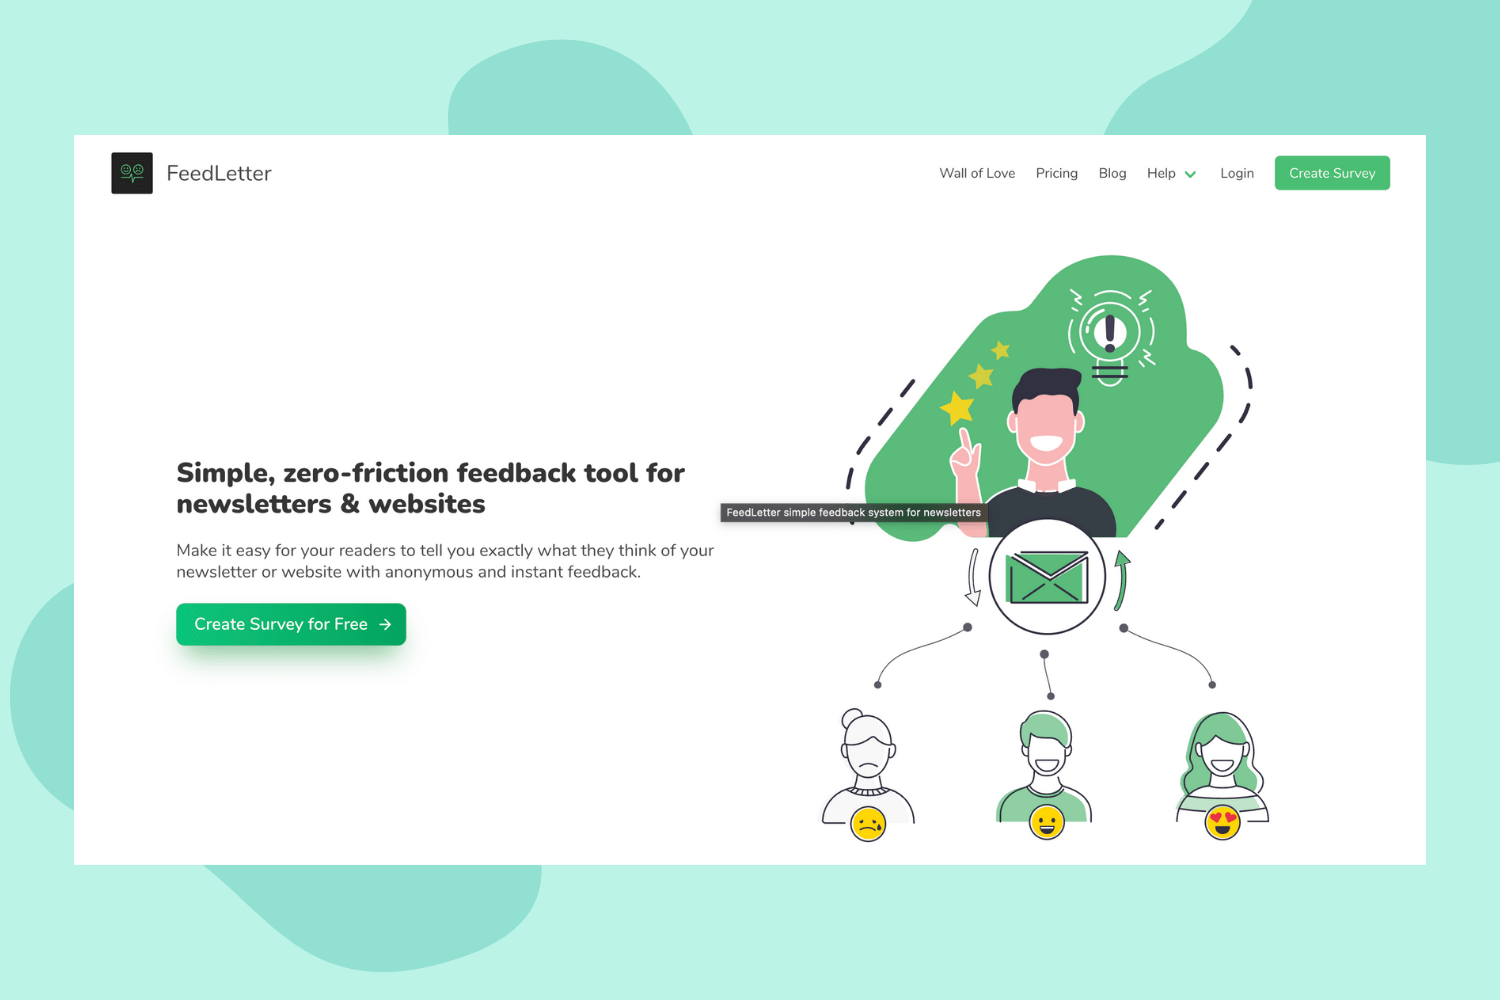 FeedLetter: A dedicated tool to collect newsletter feedback